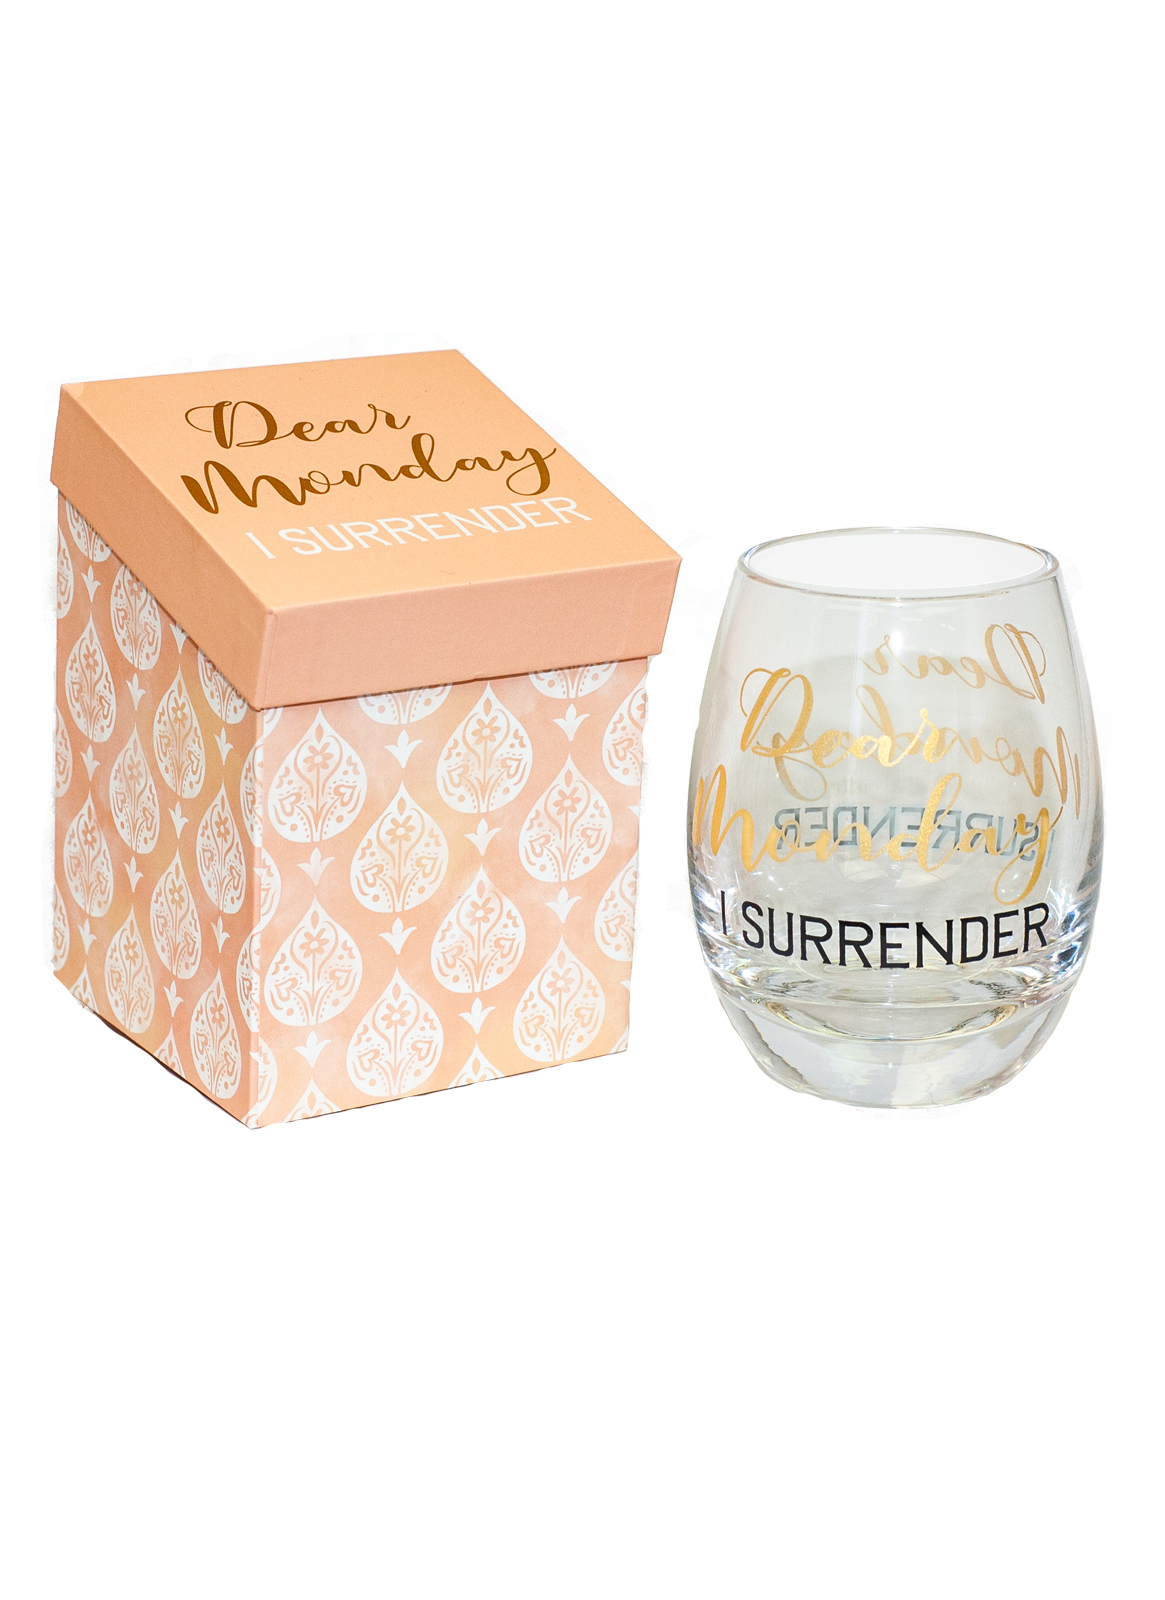 Funny Stemless Wine Glass Dear Monday Gift Boxed - TAMBORIL